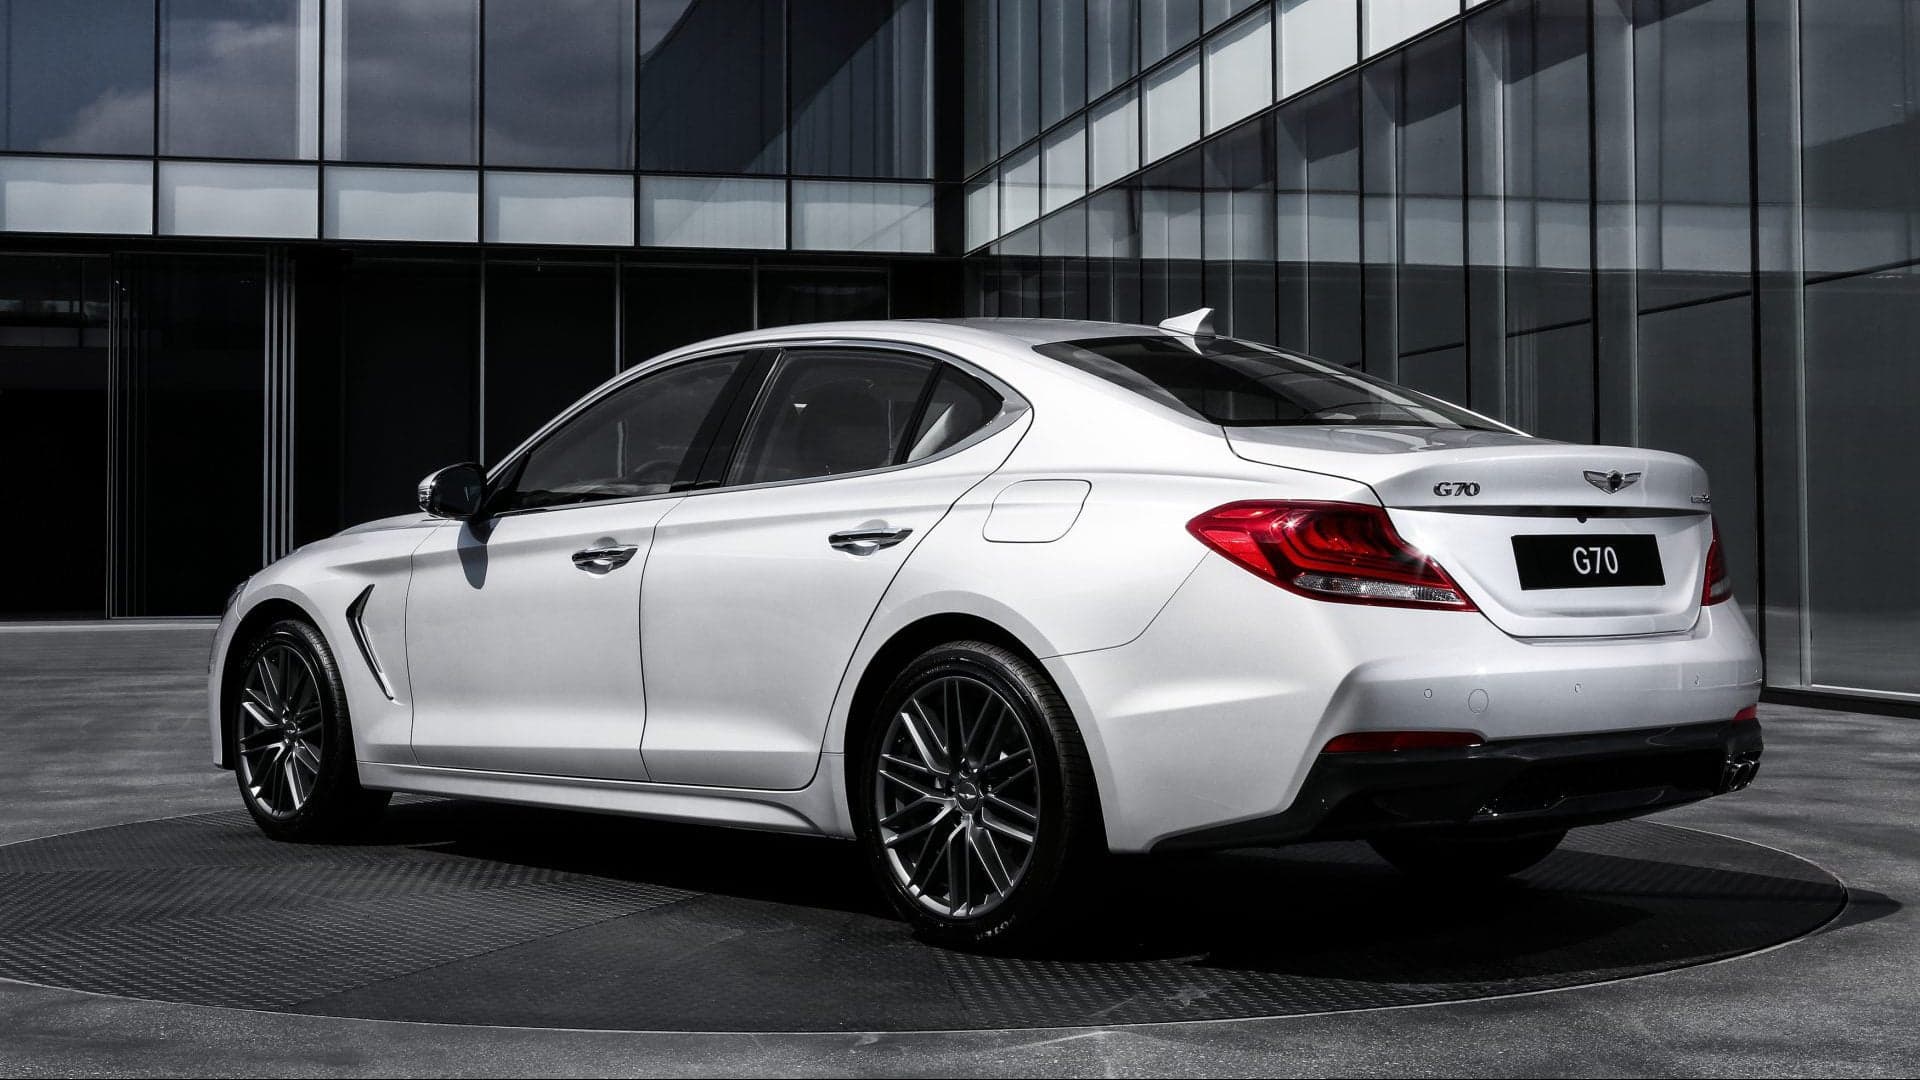 The 2019 Genesis G70 Will Be Available With a Manual in the U.S.